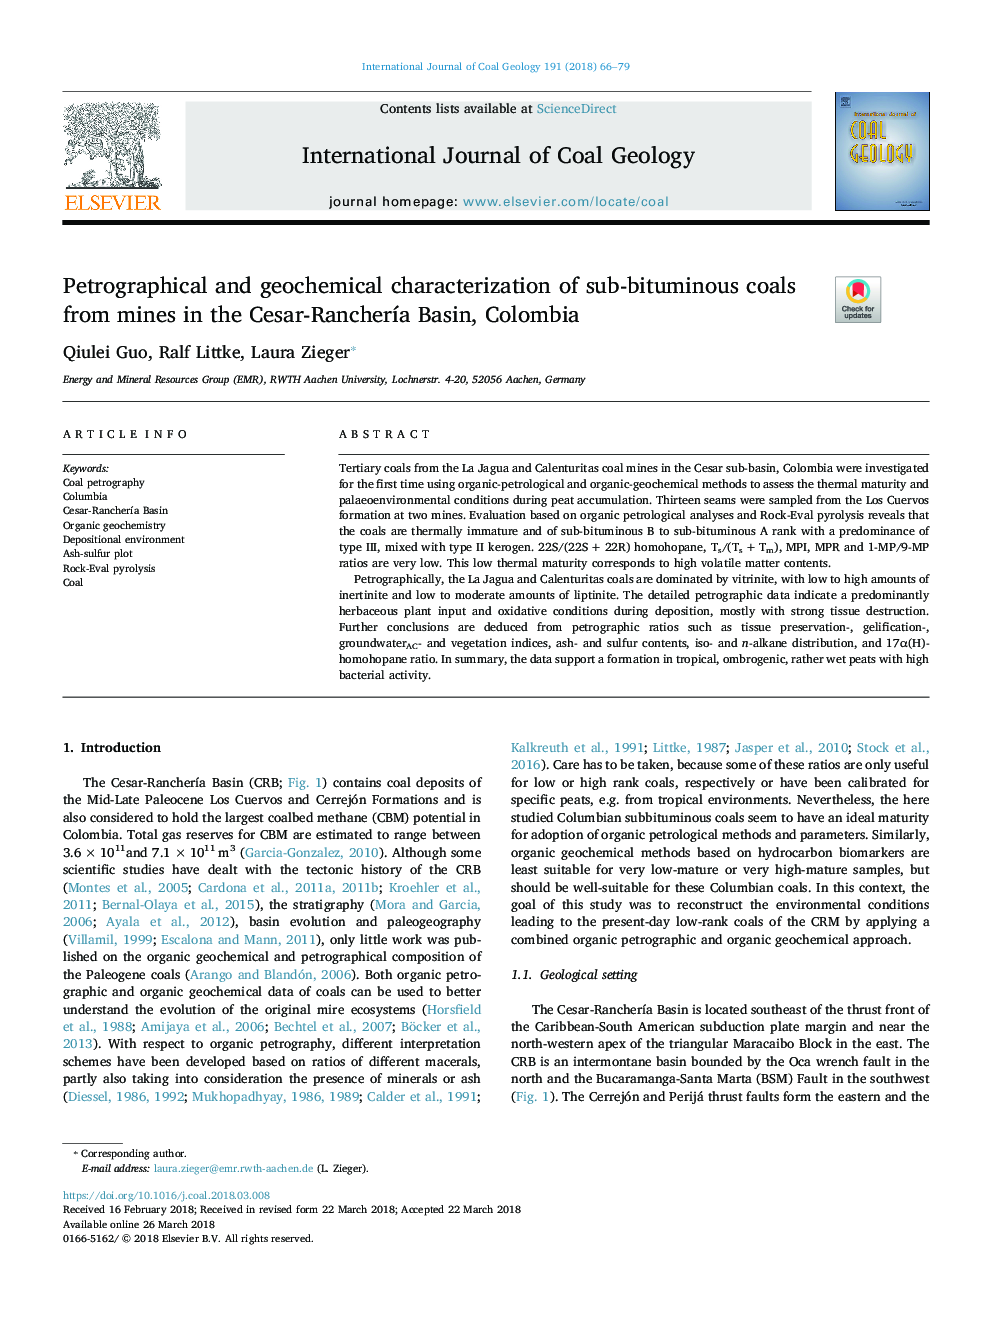 Petrographical and geochemical characterization of sub-bituminous coals from mines in the Cesar-RancherÃ­a Basin, Colombia